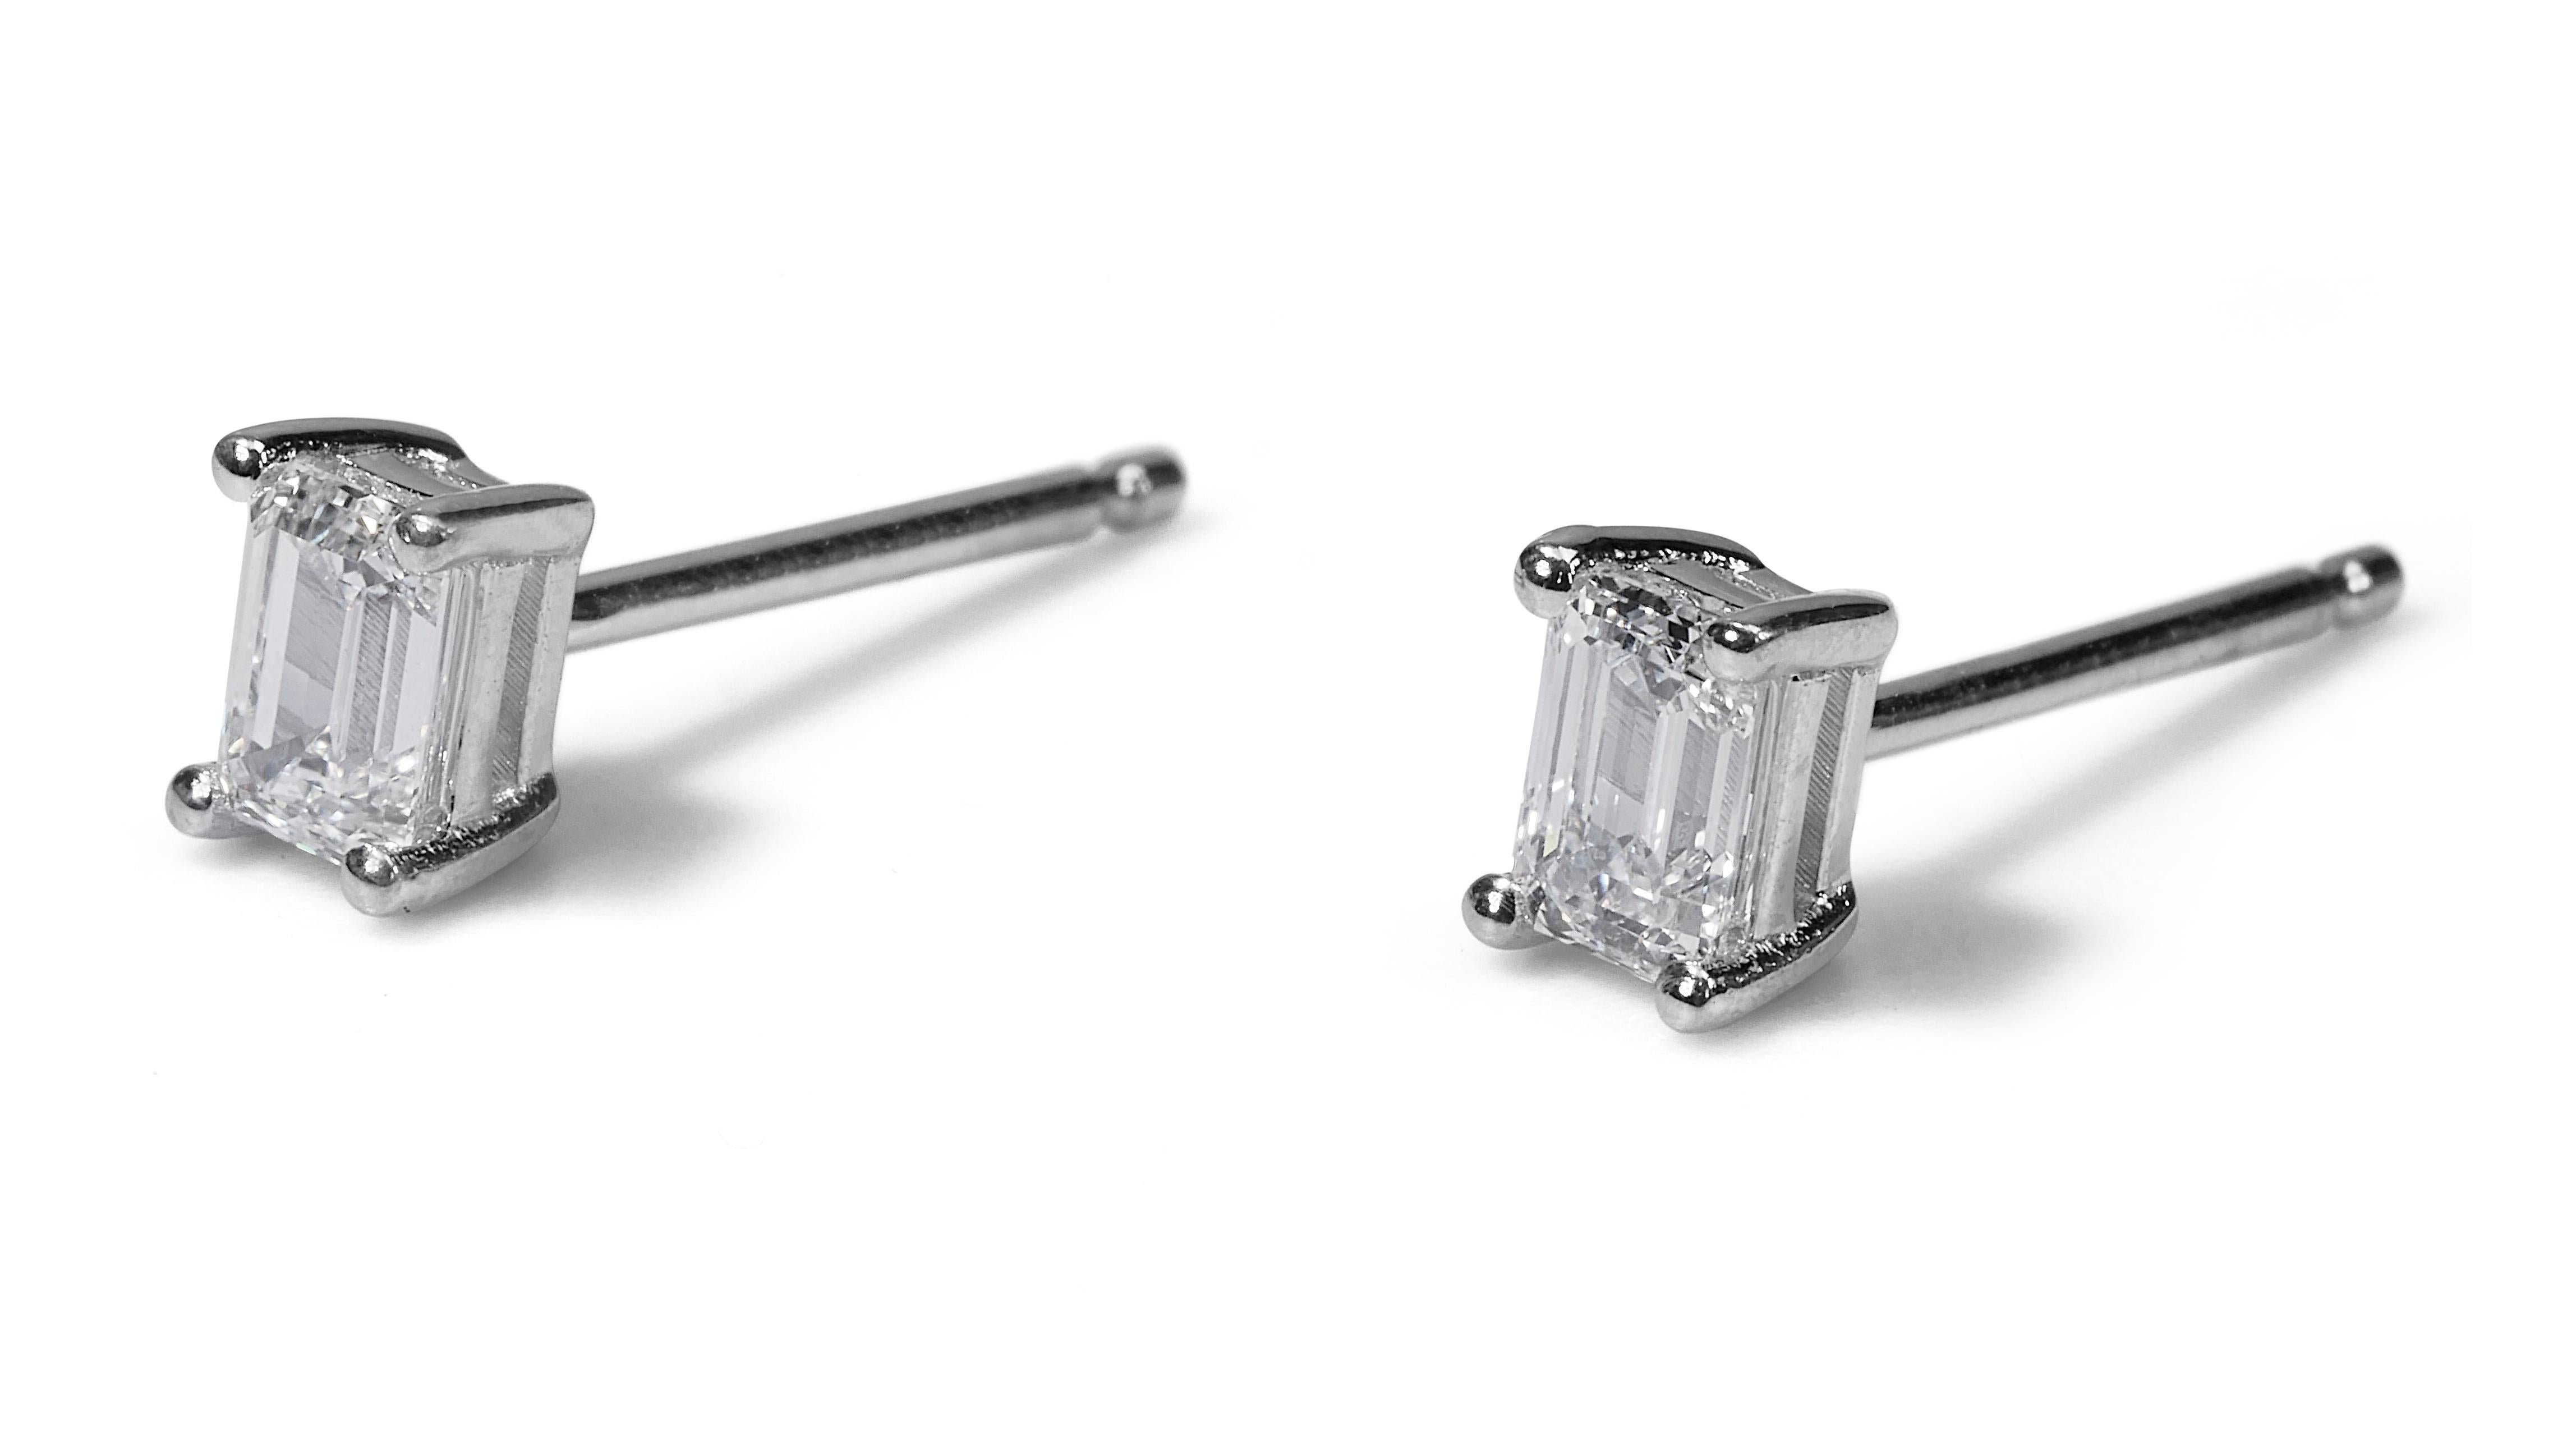 
Enchanting 18K White Gold Natural Diamonds Stud Earrings w/1.41 Carat - GIA Certified

These captivating 18K white gold stud earrings feature a total of 1.41 carats of dazzling emerald cut diamonds. The emerald cut creates a unique and elegant